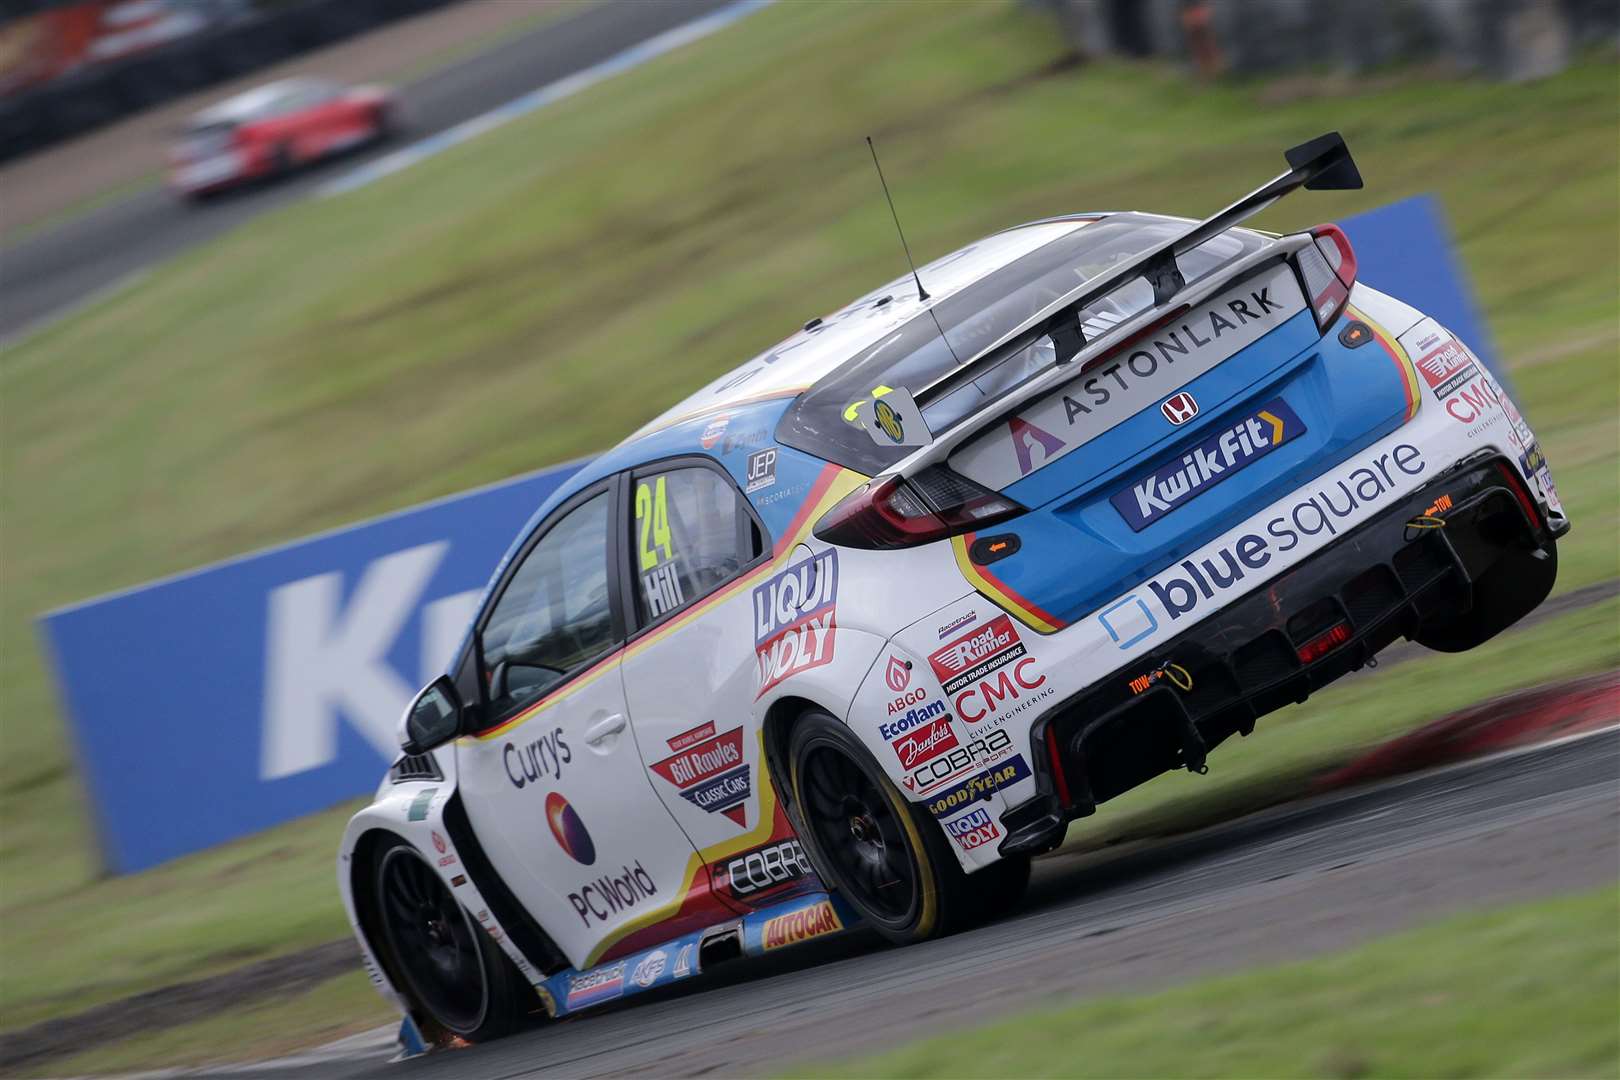 Two podiums in as many weekends for Jake Hill Picture: BTCC (41633638)